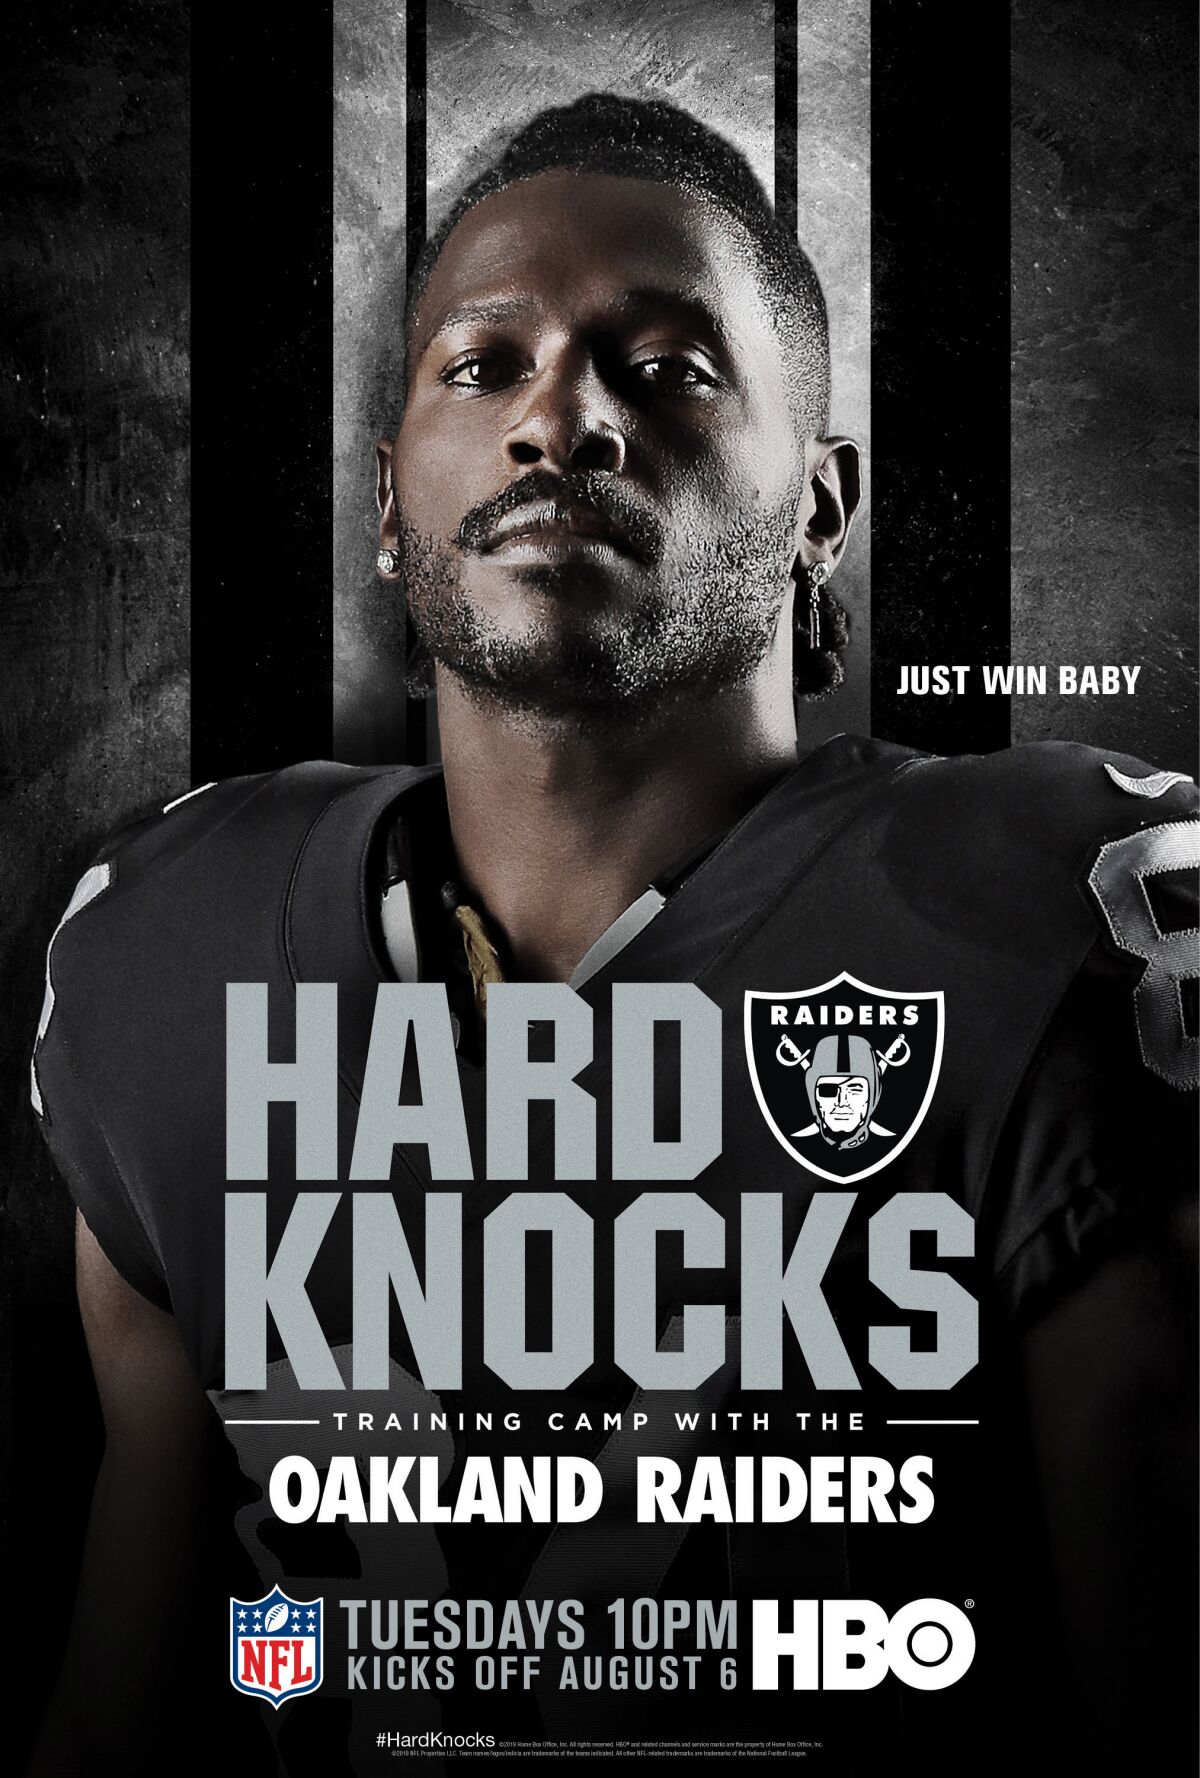 Oakland Raiders wide receiver Antonio Brown appears on the poster for "Hard Knocks."